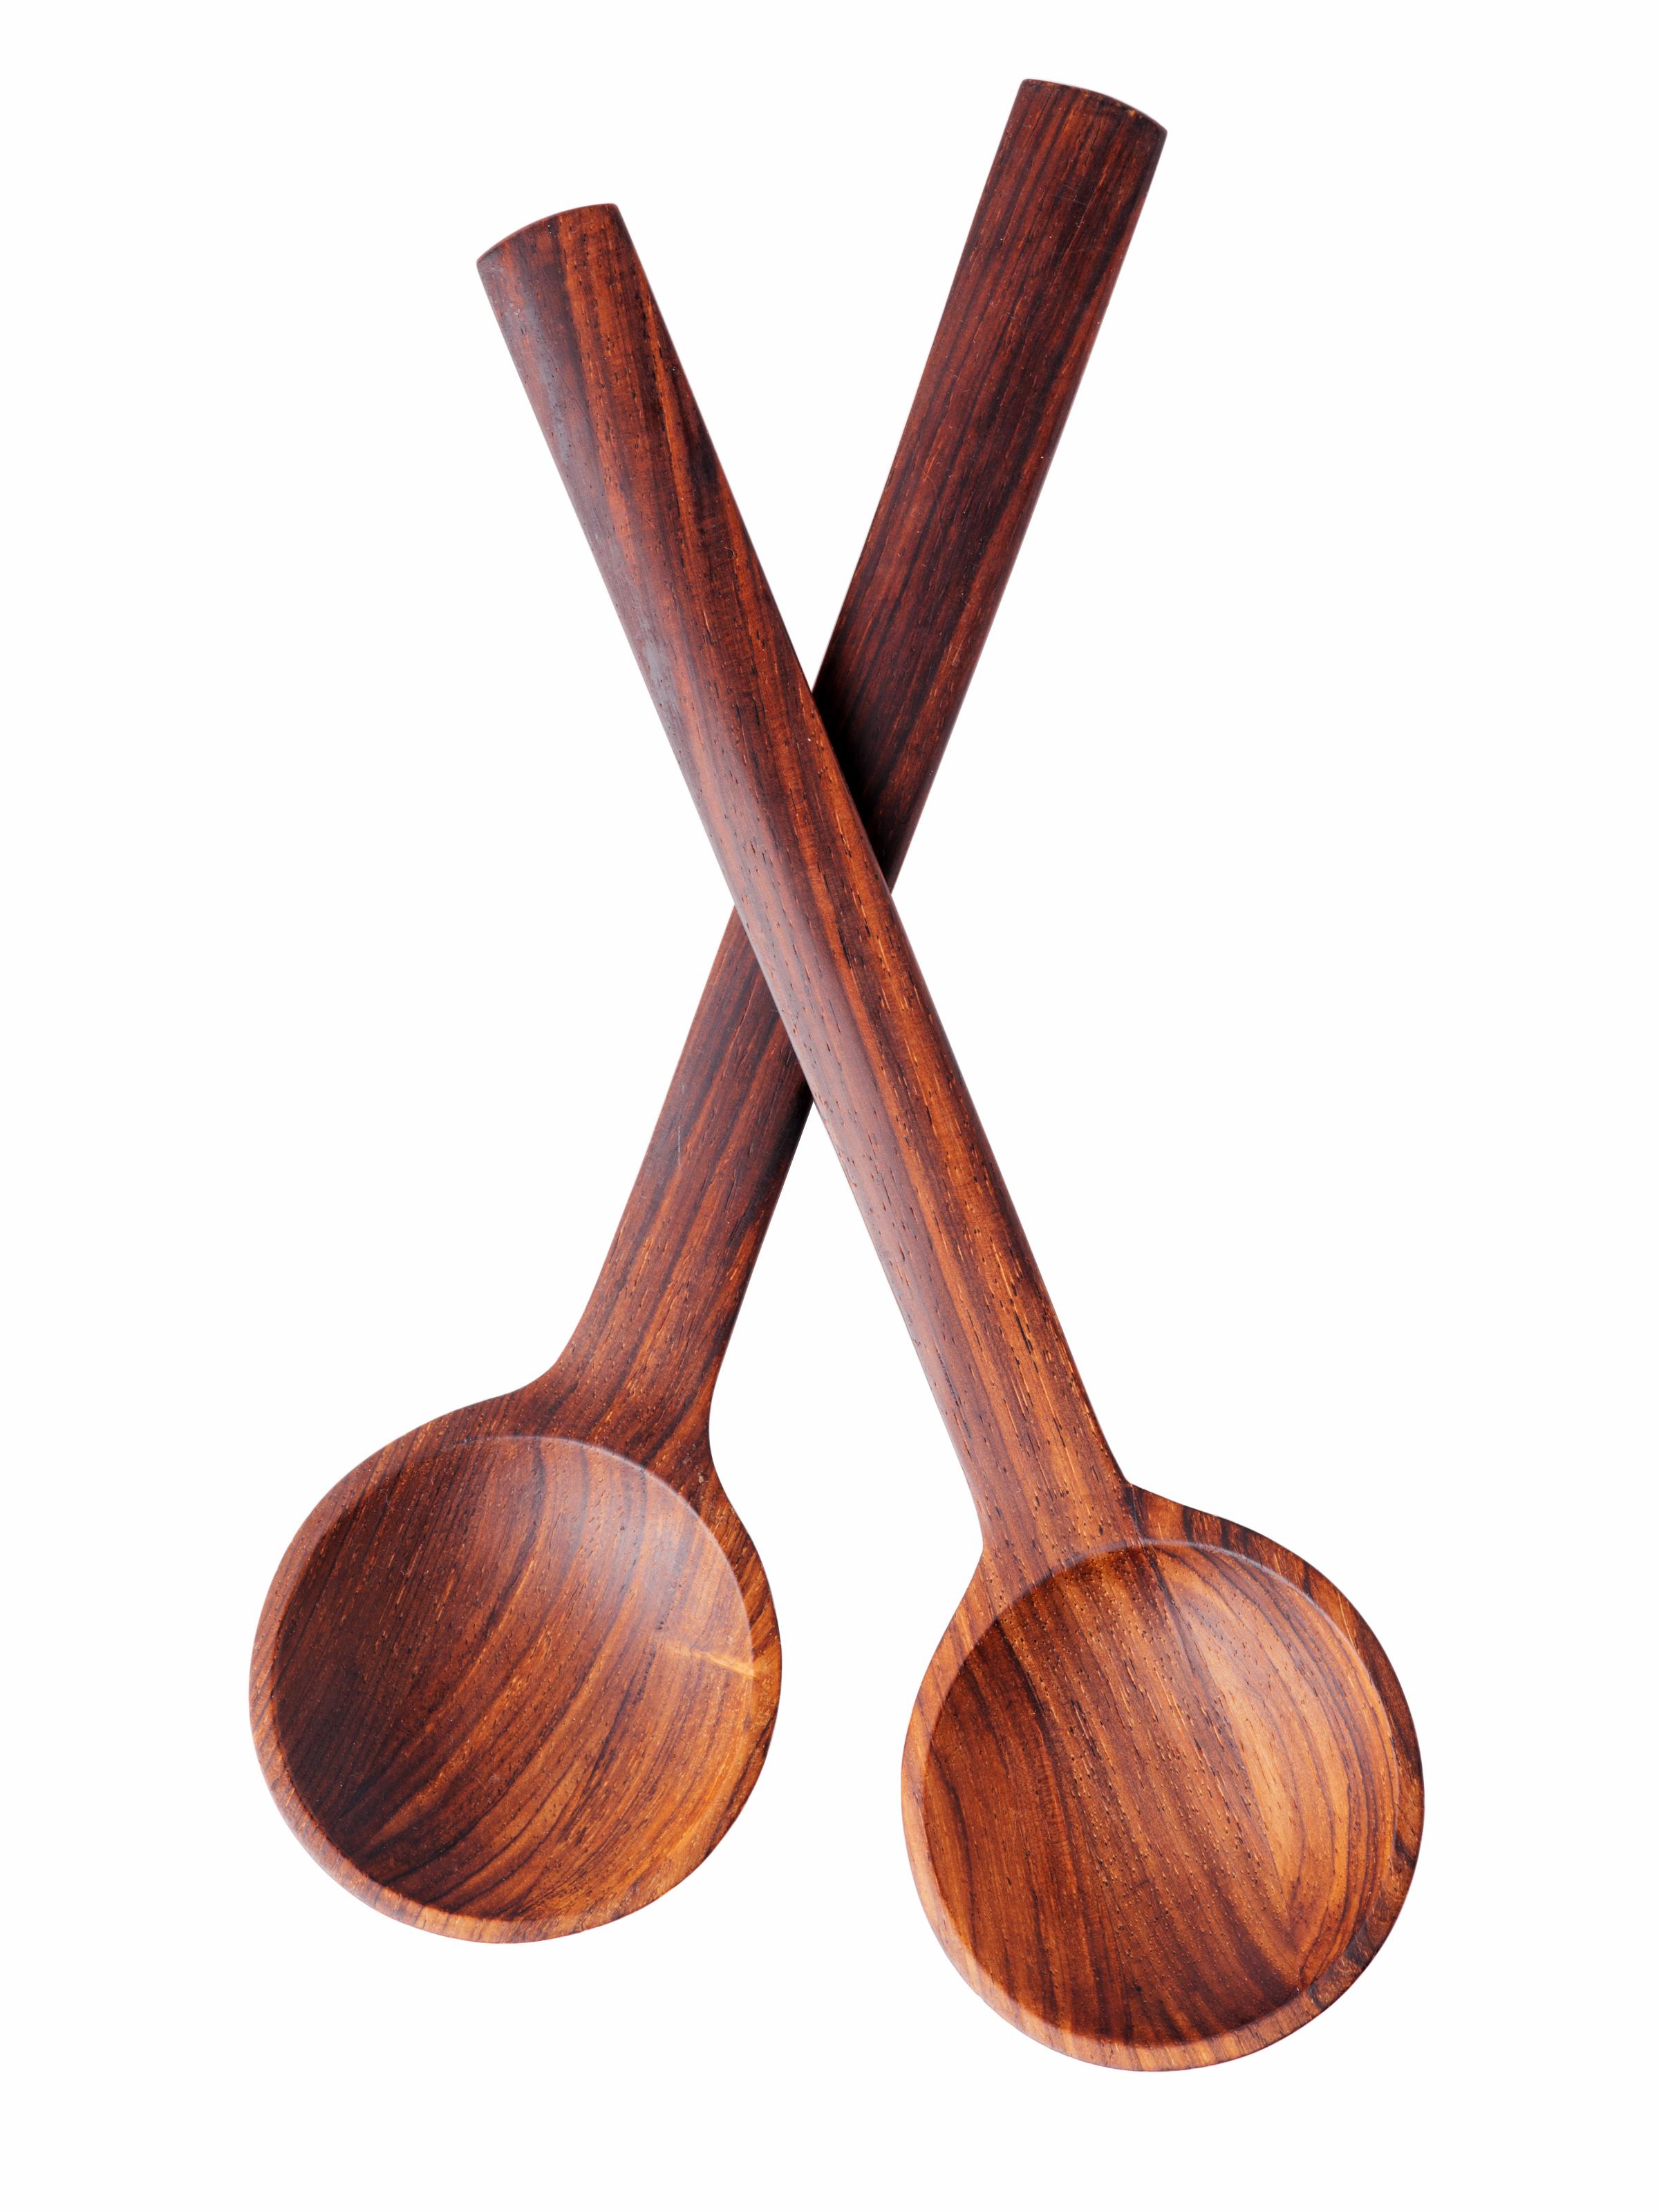 A scarce pair of Danish Modern serving spoons in solid rosewood designed by Jens Quistgaard (JHQ) for Dansk. Each signed 'Danmark'. 